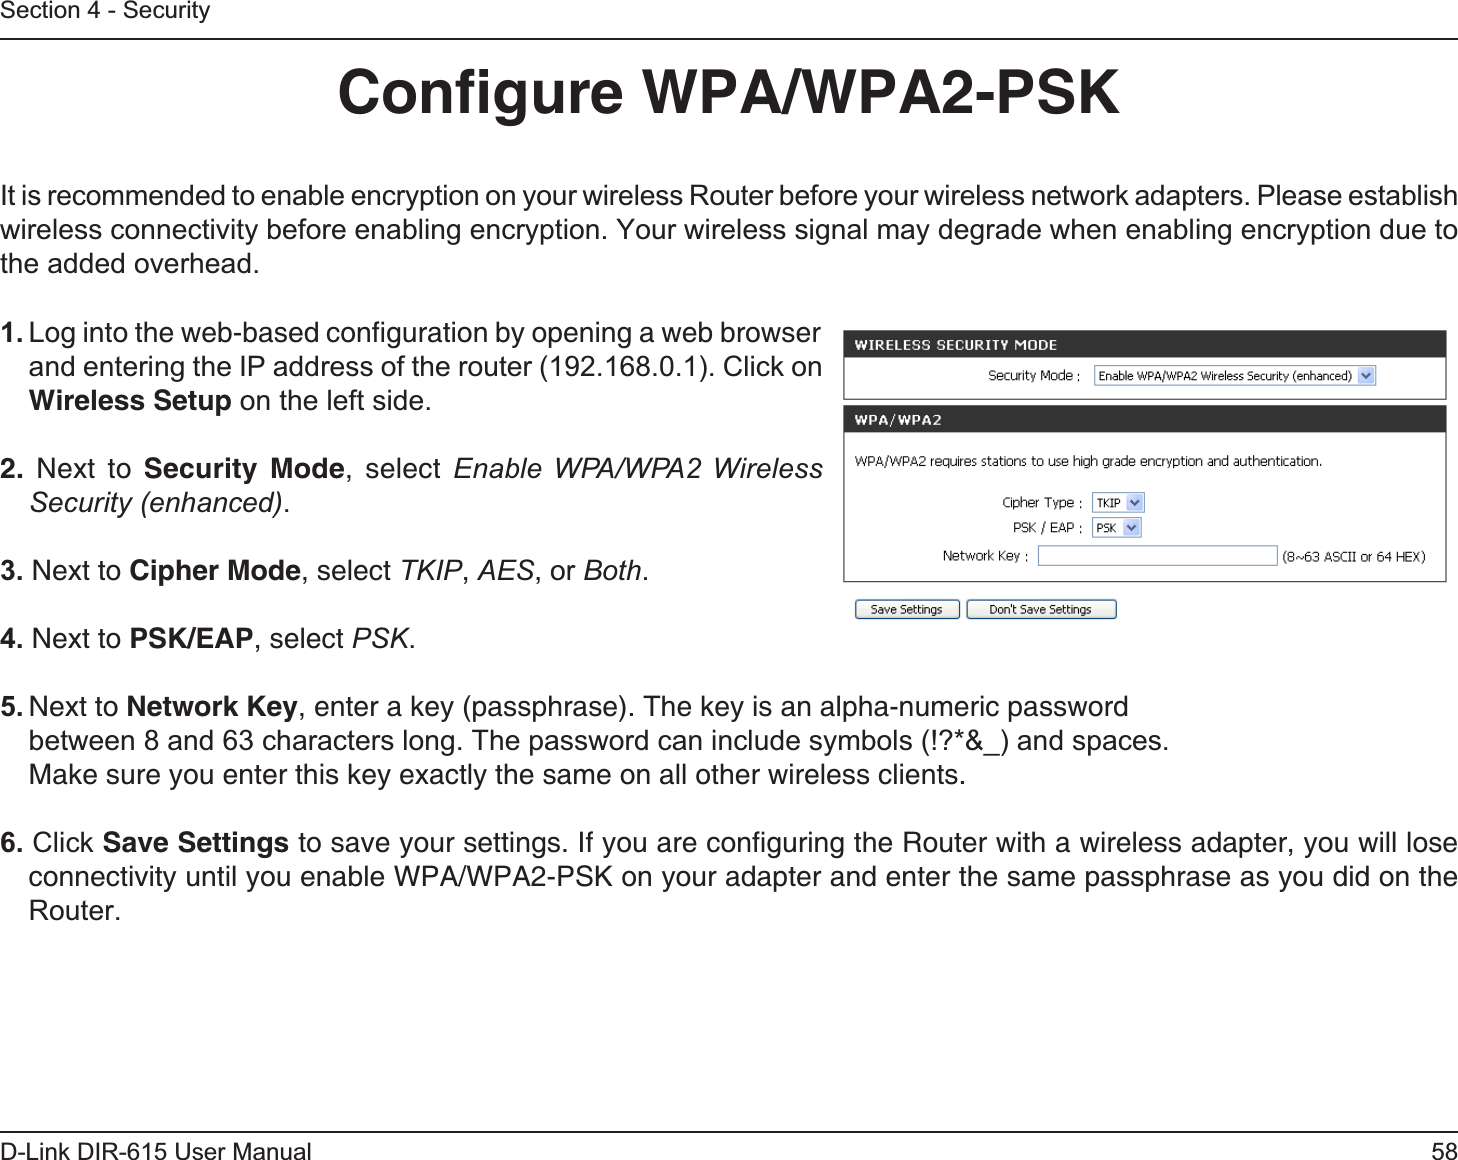 58D-Link DIR-615 User ManualSection 4 - SecurityConﬁgure WPA/WPA2-PSKIt is recommended to enable encryption on your wireless Router before your wireless network adapters. Please establish wireless connectivity before enabling encryption. Your wireless signal may degrade when enabling encryption due to the added overhead.1. Log into the web-based conﬁguration by opening a web browser and entering the IP address of the router (192.168.0.1). Click onWireless Setup on the left side.2. Next to Security Mode, select Enable WPA/WPA2 Wireless Security (enhanced).3. Next to Cipher Mode, select TKIP,AES,or Both.4. Next to PSK/EAP, select PSK.5. Next to Network Key, enter a key (passphrase). The key is an alpha-numeric passwordbetween 8 and 63 characters long. The password can include symbols (!?*&amp;_) and spaces. Make sure you enter this key exactly the same on all other wireless clients.6. Click Save Settings to save your settings. If you are conﬁguring the Router with a wireless adapter, you will lose connectivity until you enable WPA/WPA2-PSK on your adapter and enter the same passphrase as you did on the Router.